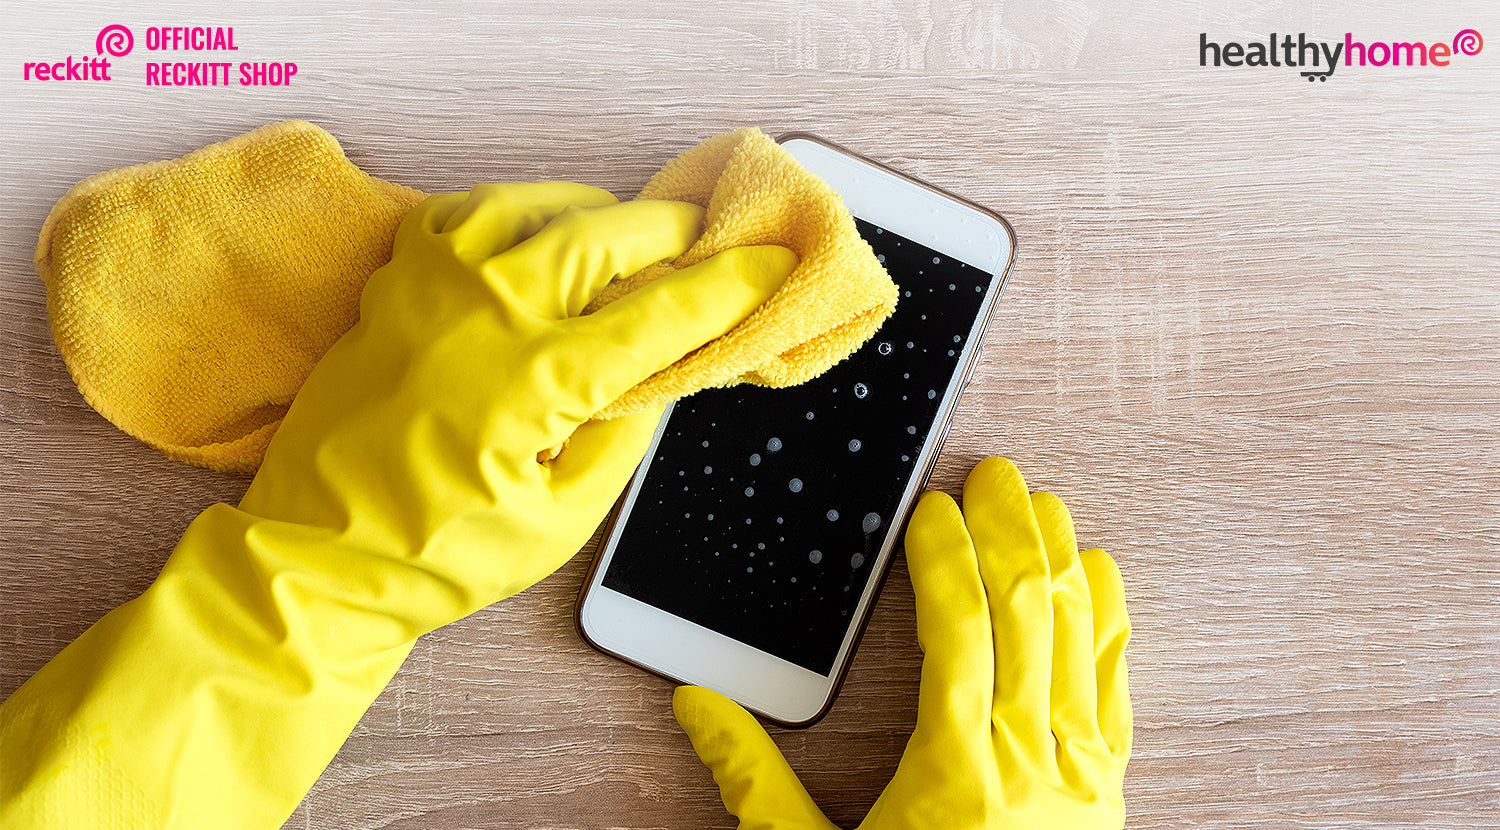 4 Tips on How to Safely Clean and Sanitize Electronics at Home